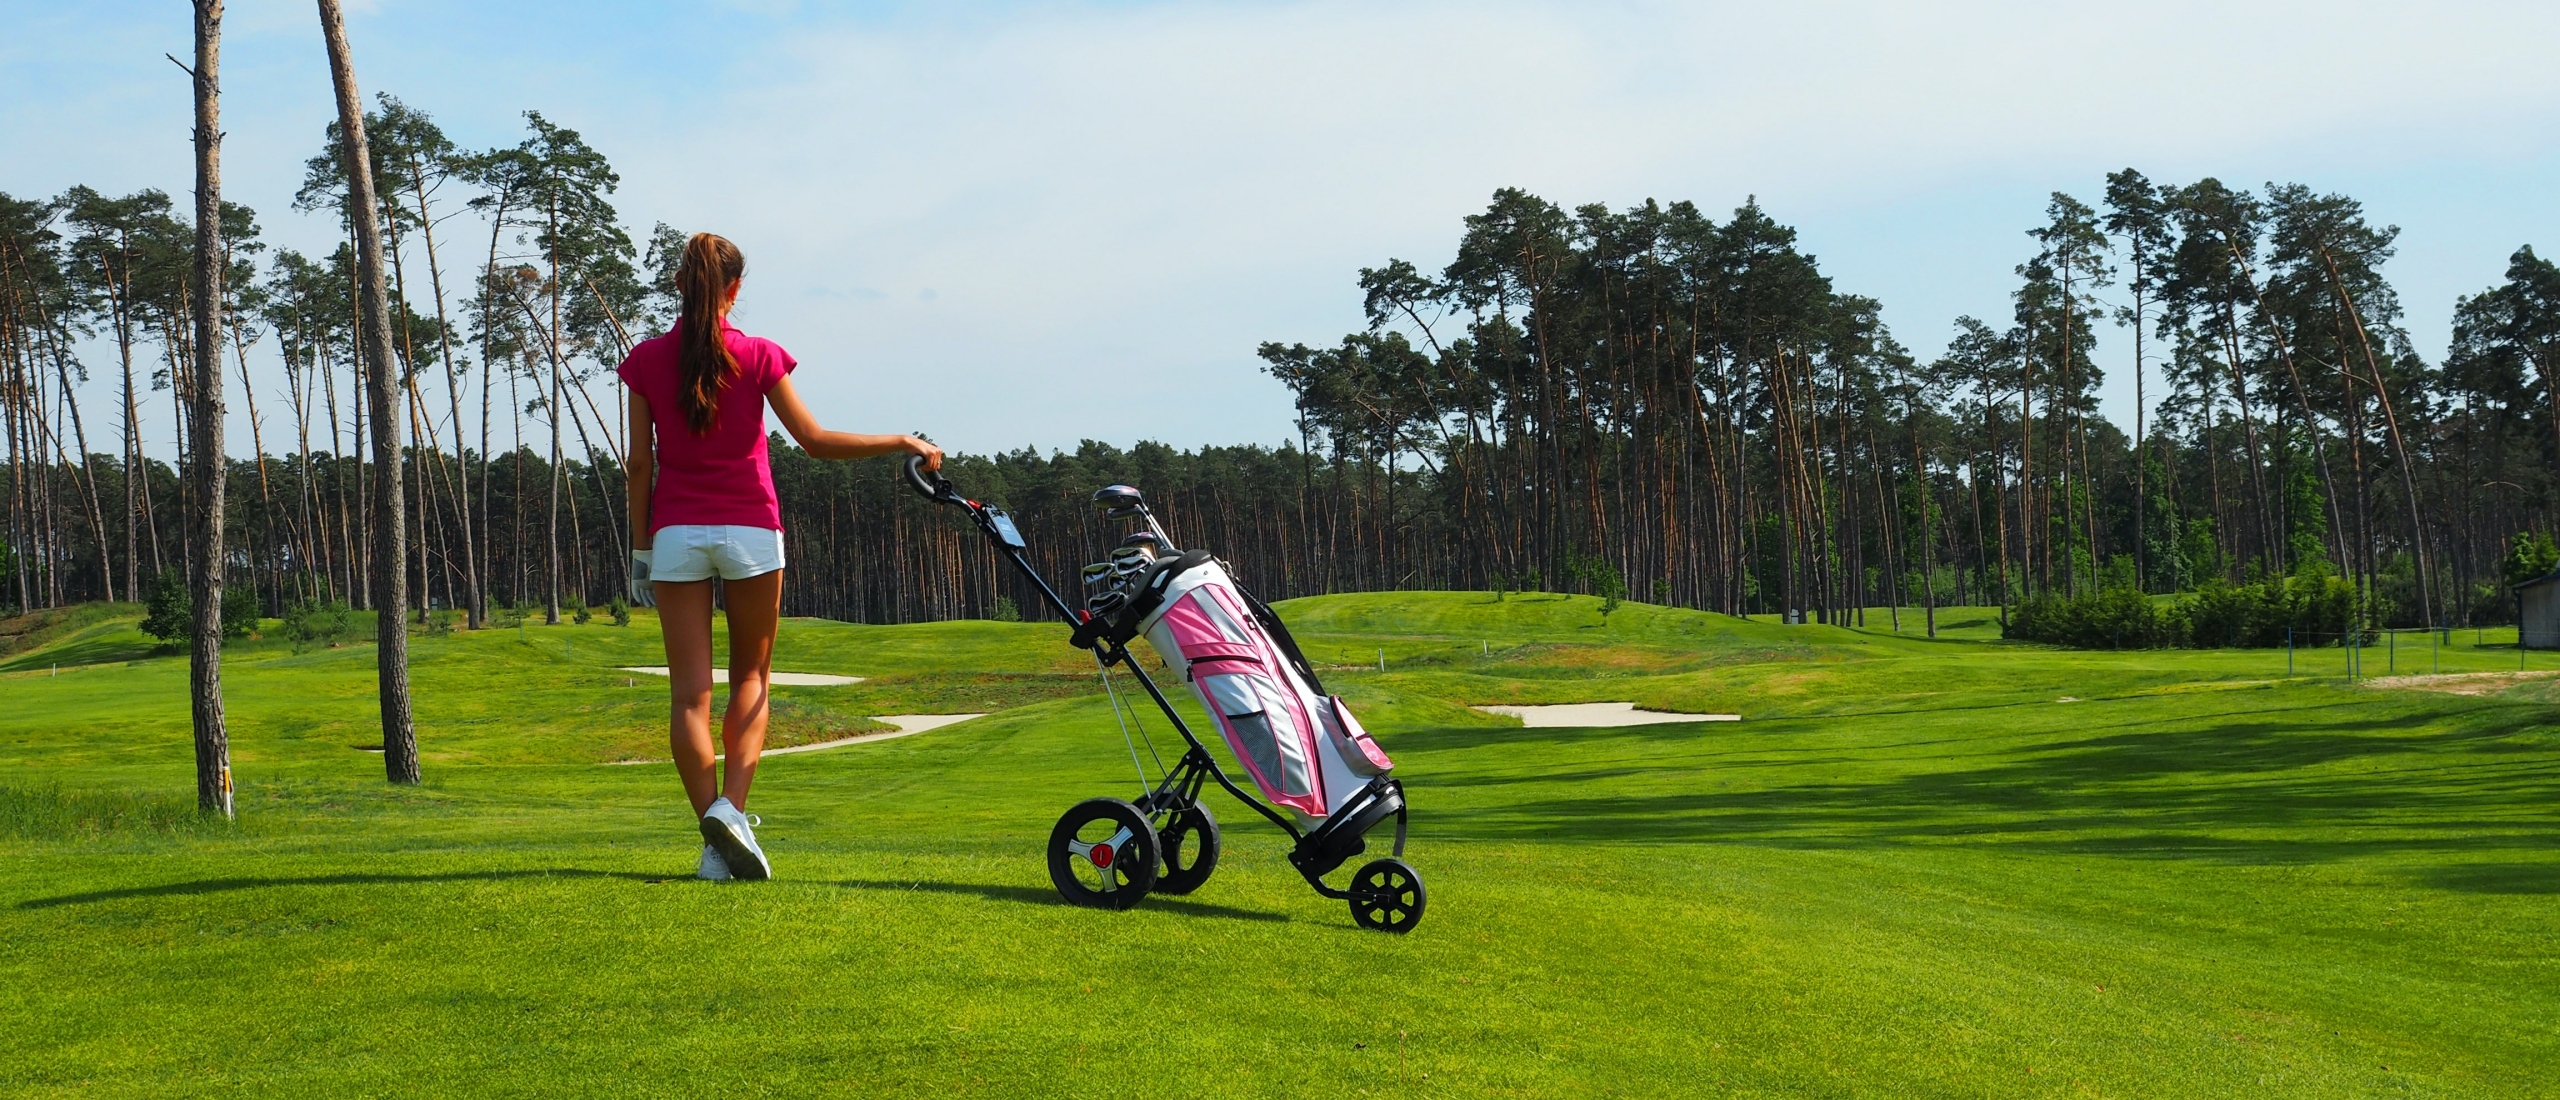 All About Ladies Golf